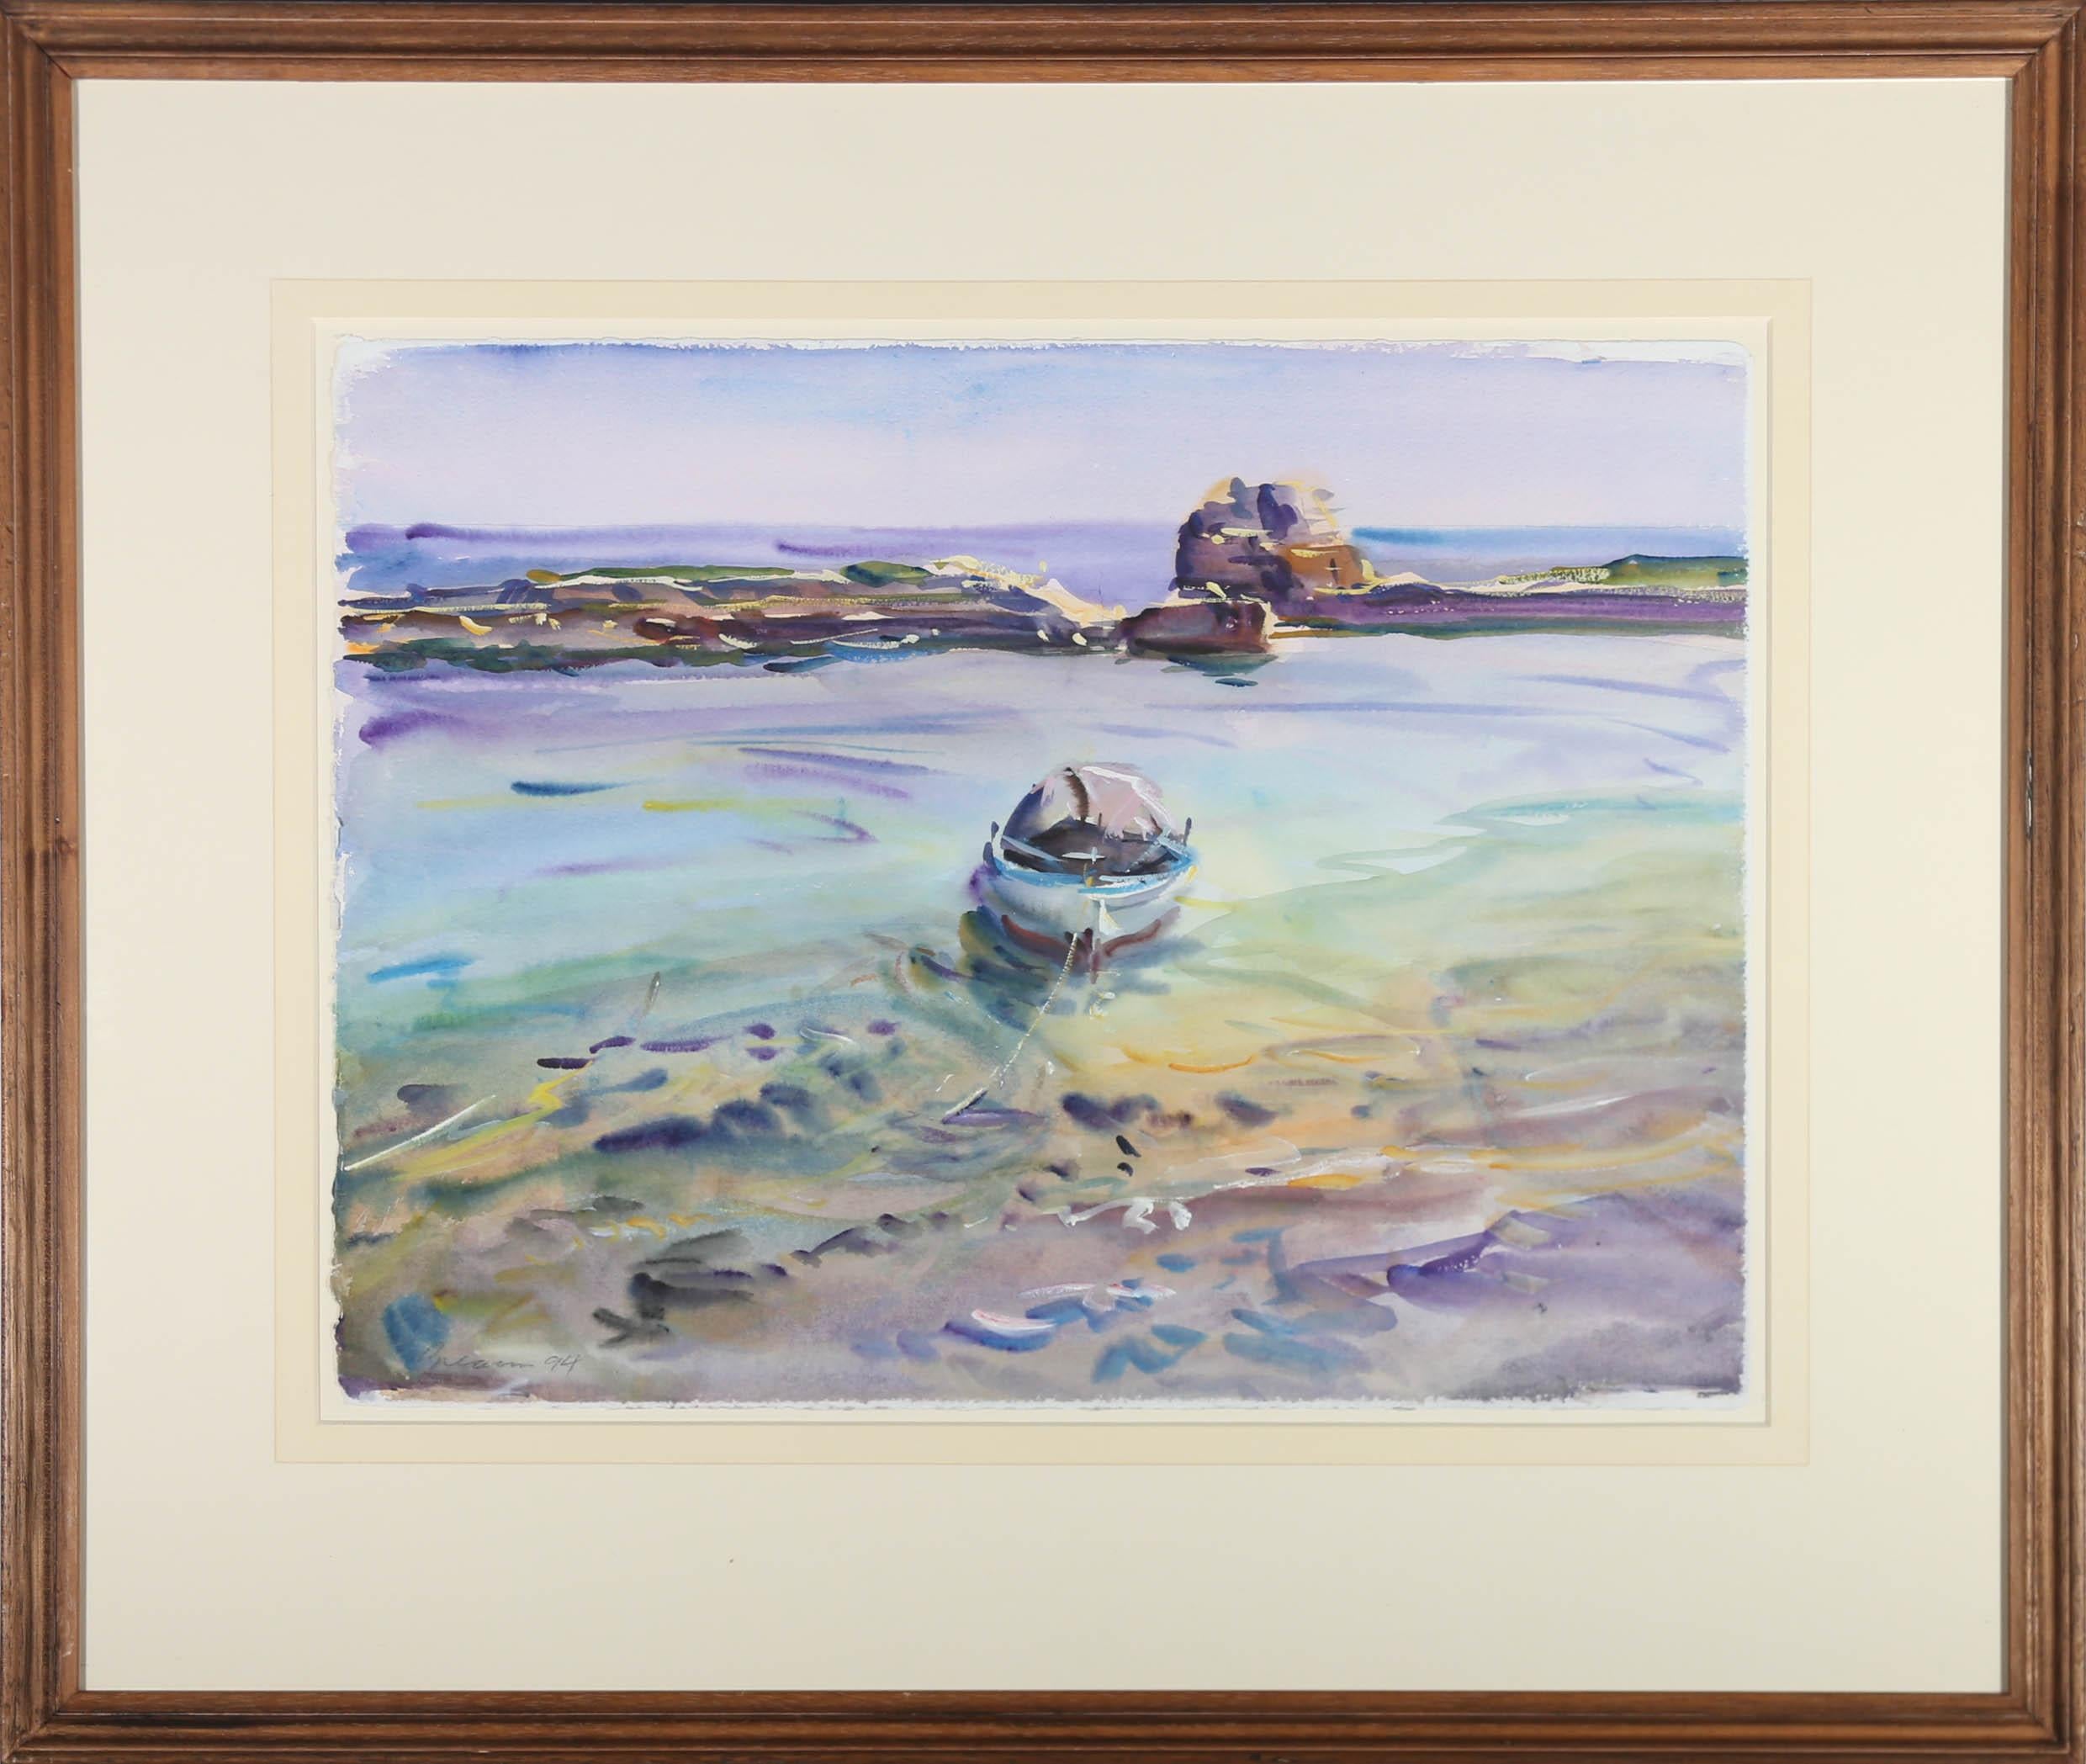 A charming impressionistic watercolour coastal scene showing the picturesque coastline of Corfu with a rowing boat anchored in the shallows. The artist has signed and dated to the lower left and the painting has been presented in a simple wood frame